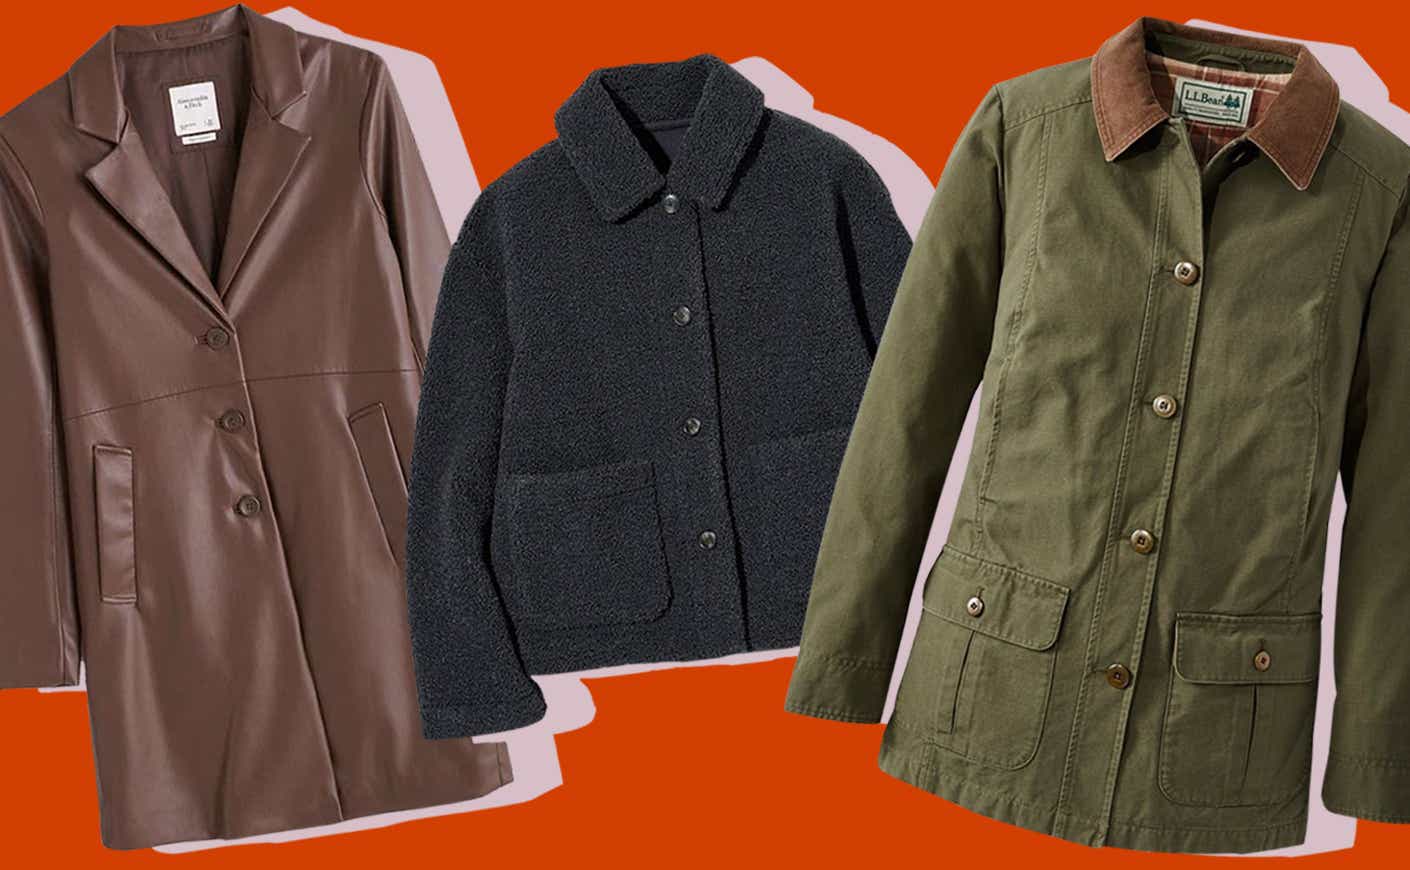 The 14 Best Fall Jackets for Women 2022 - Comfy and Warm Fall Coats